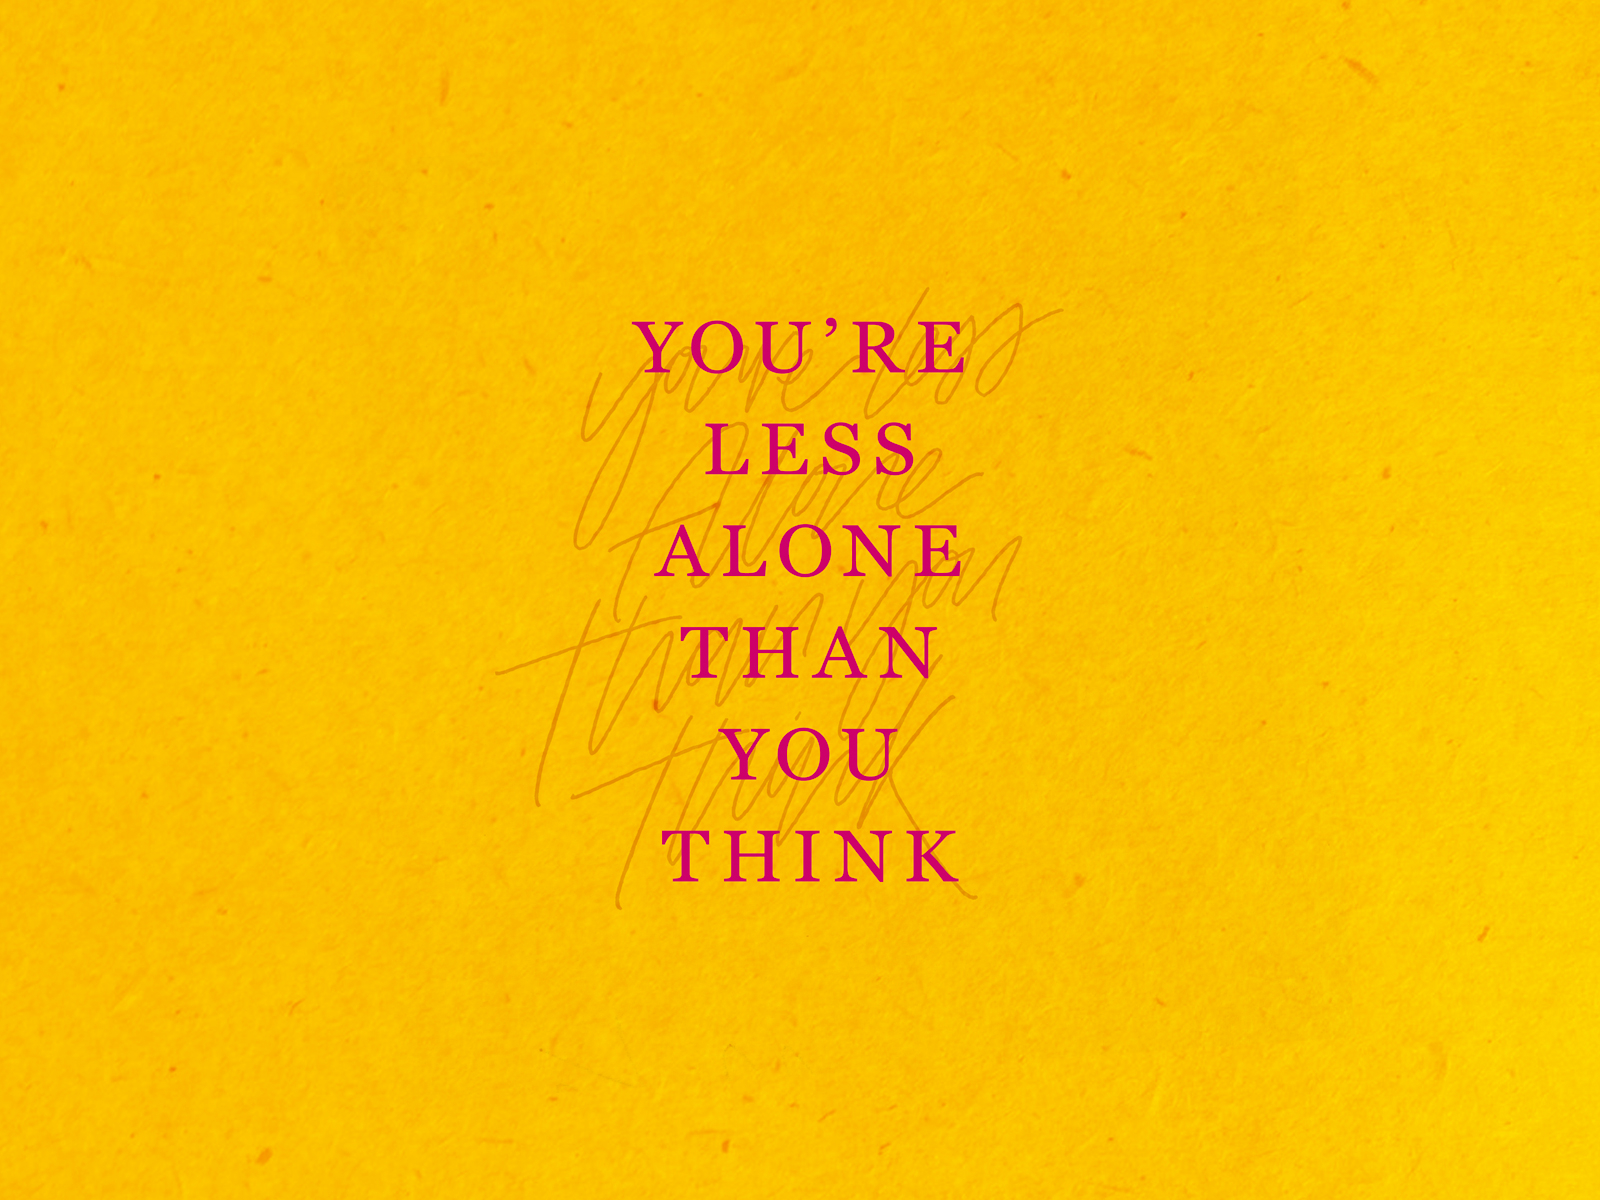 You're less alone than you think by Samuel Hume on Dribbble